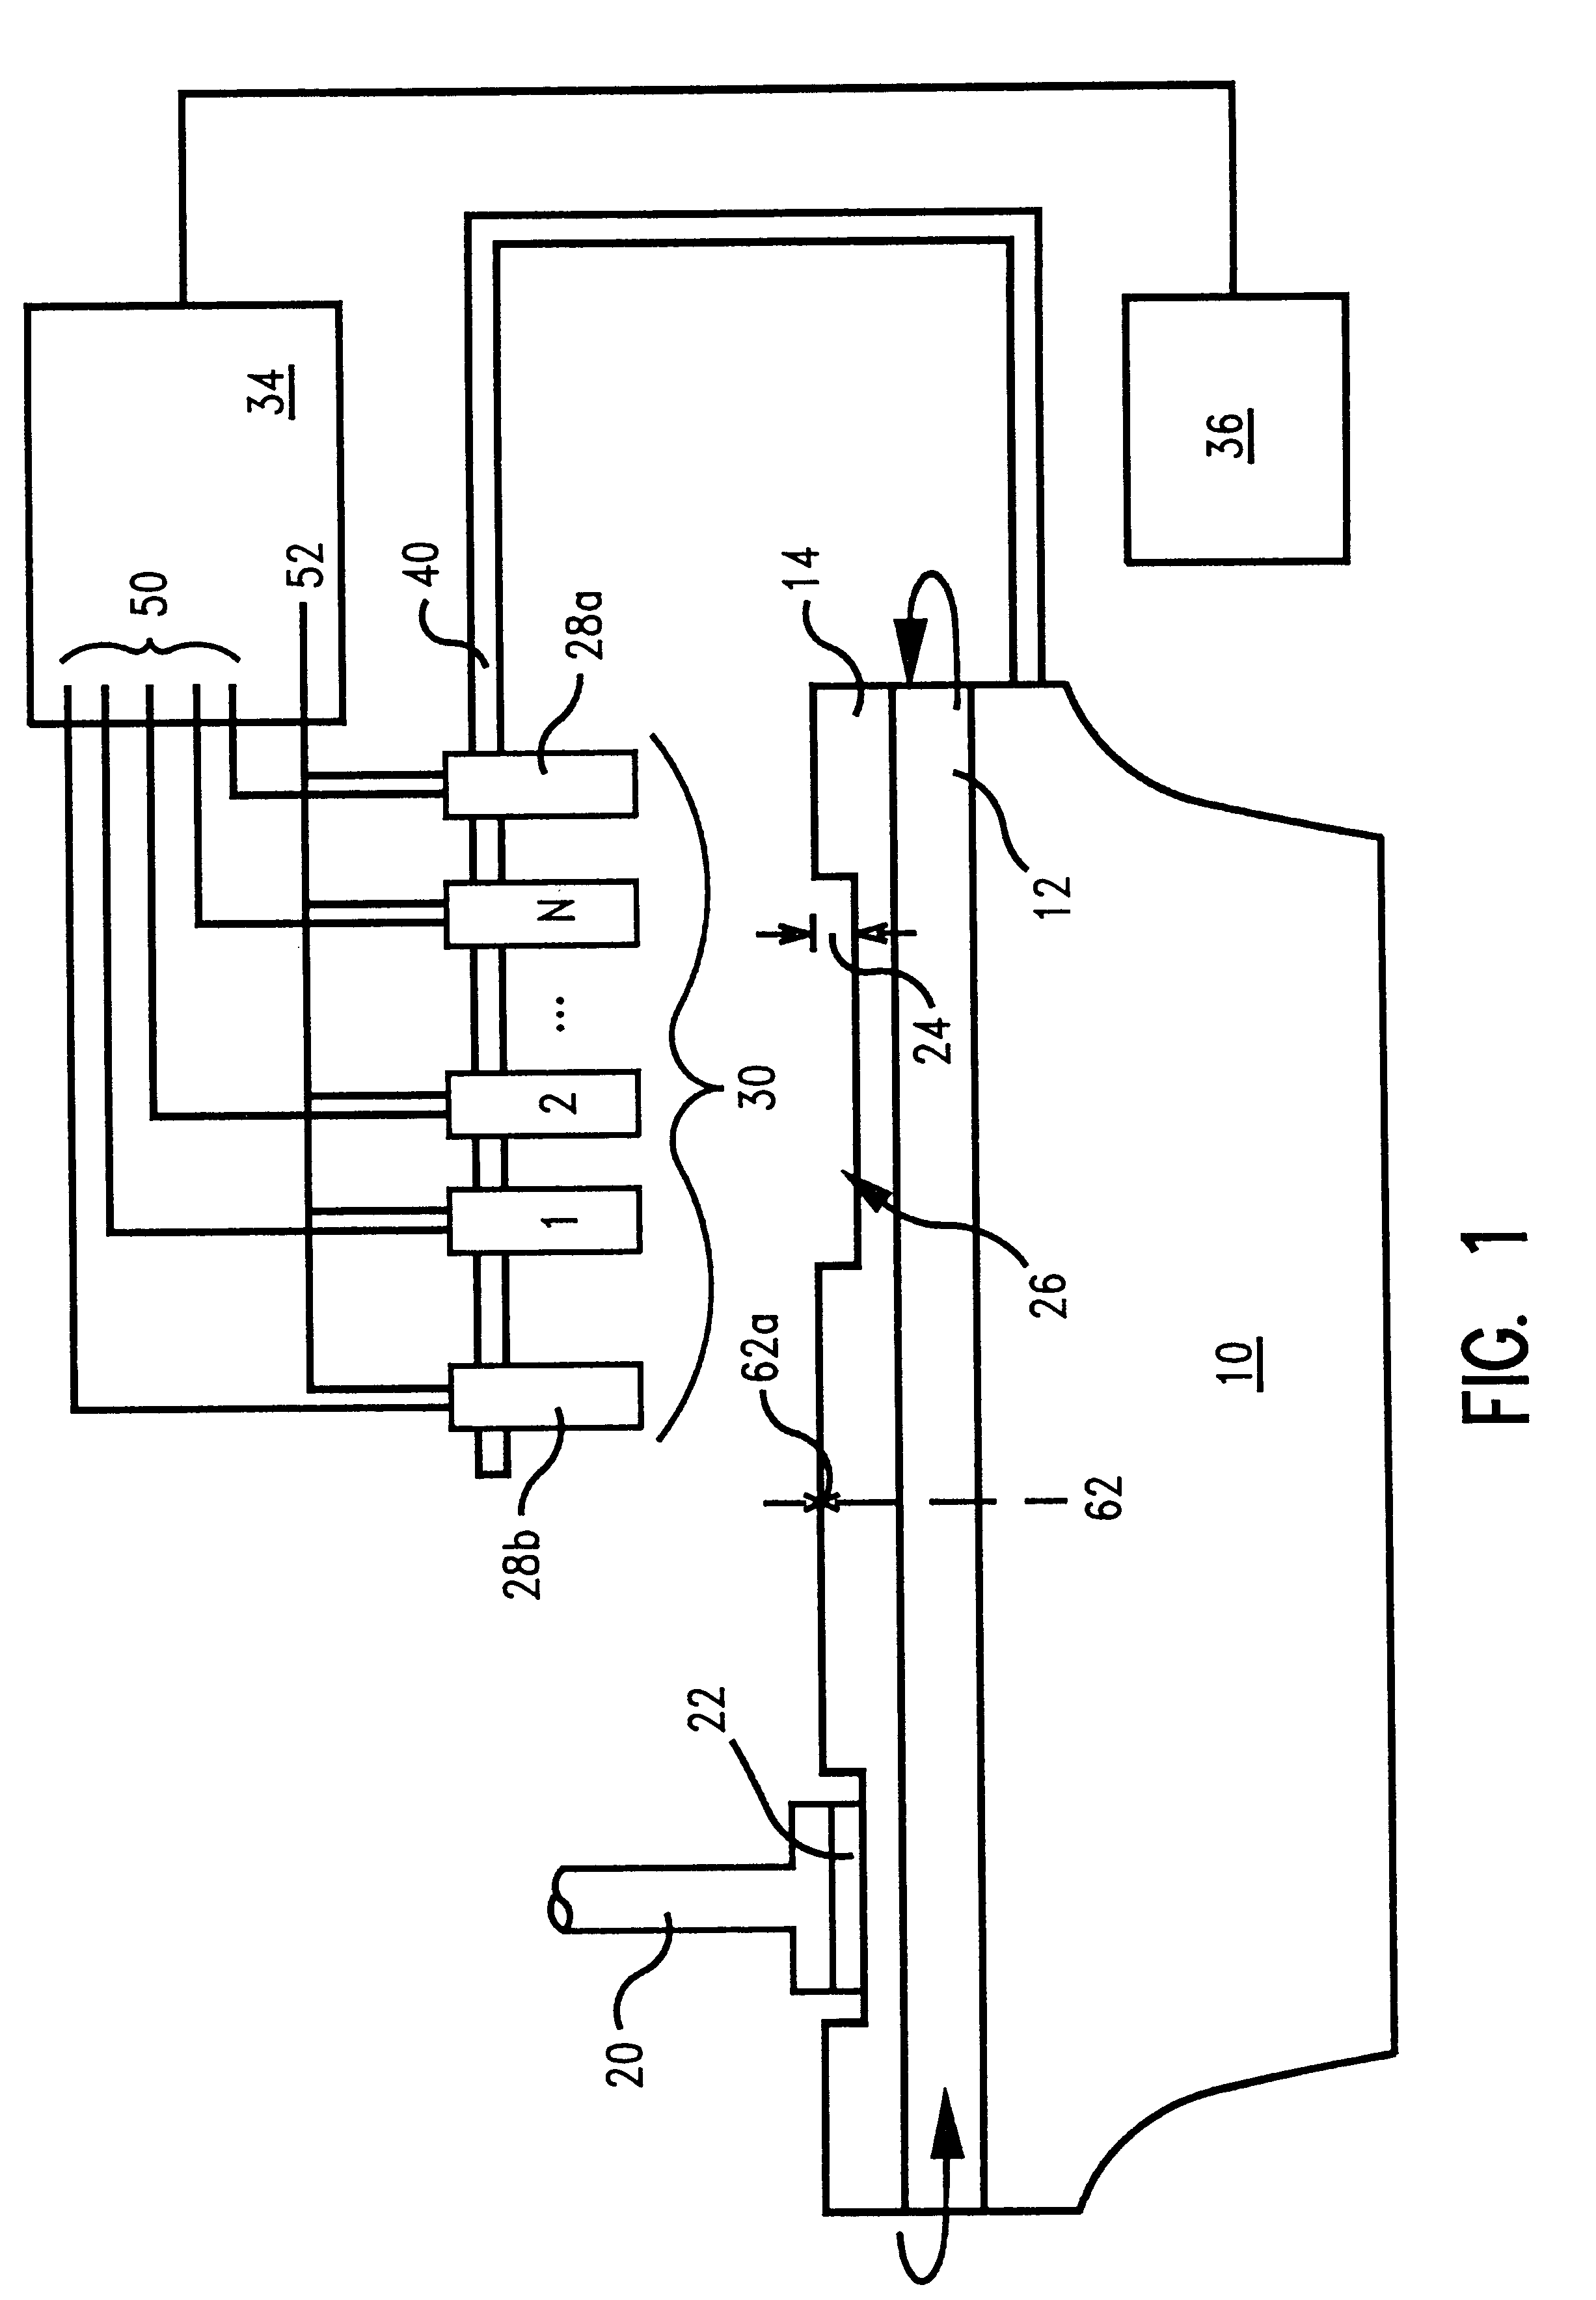 Method and apparatus for monitoring polishing pad wear during processing